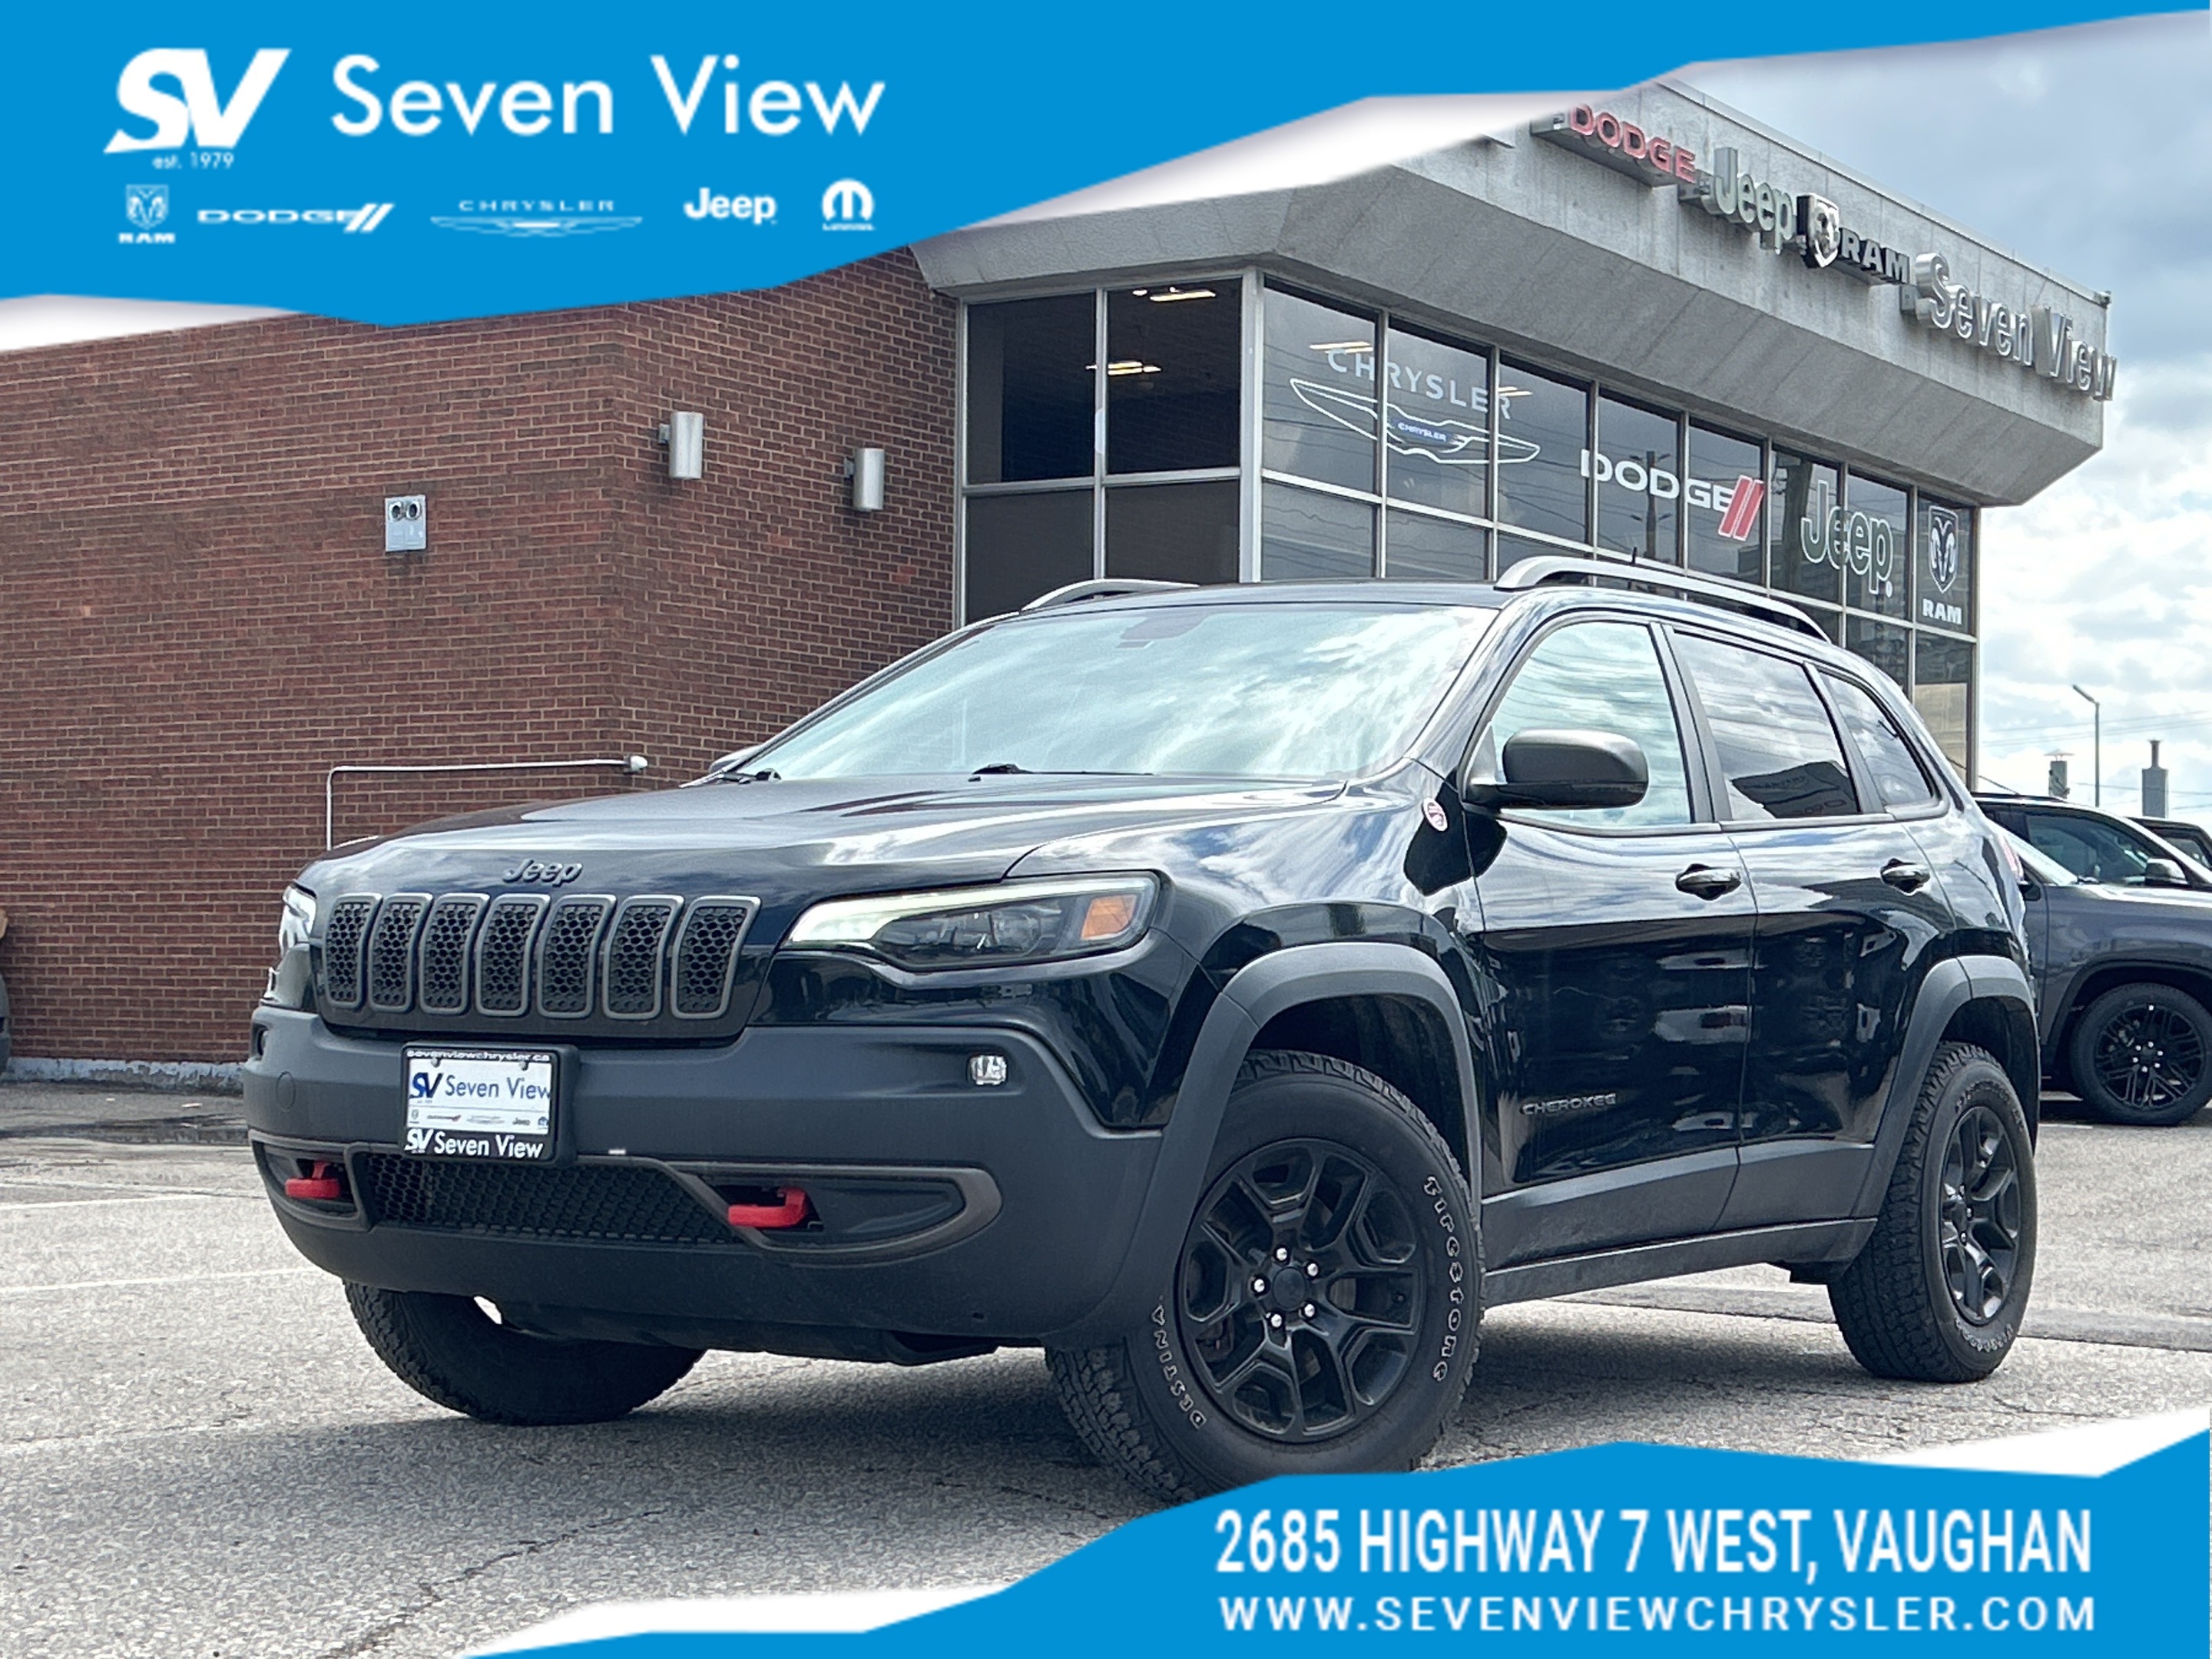 2019 Jeep Cherokee Trailhawk 4x4 NAVI/SAFETYTEC/COLD WEATHER PACKAGE